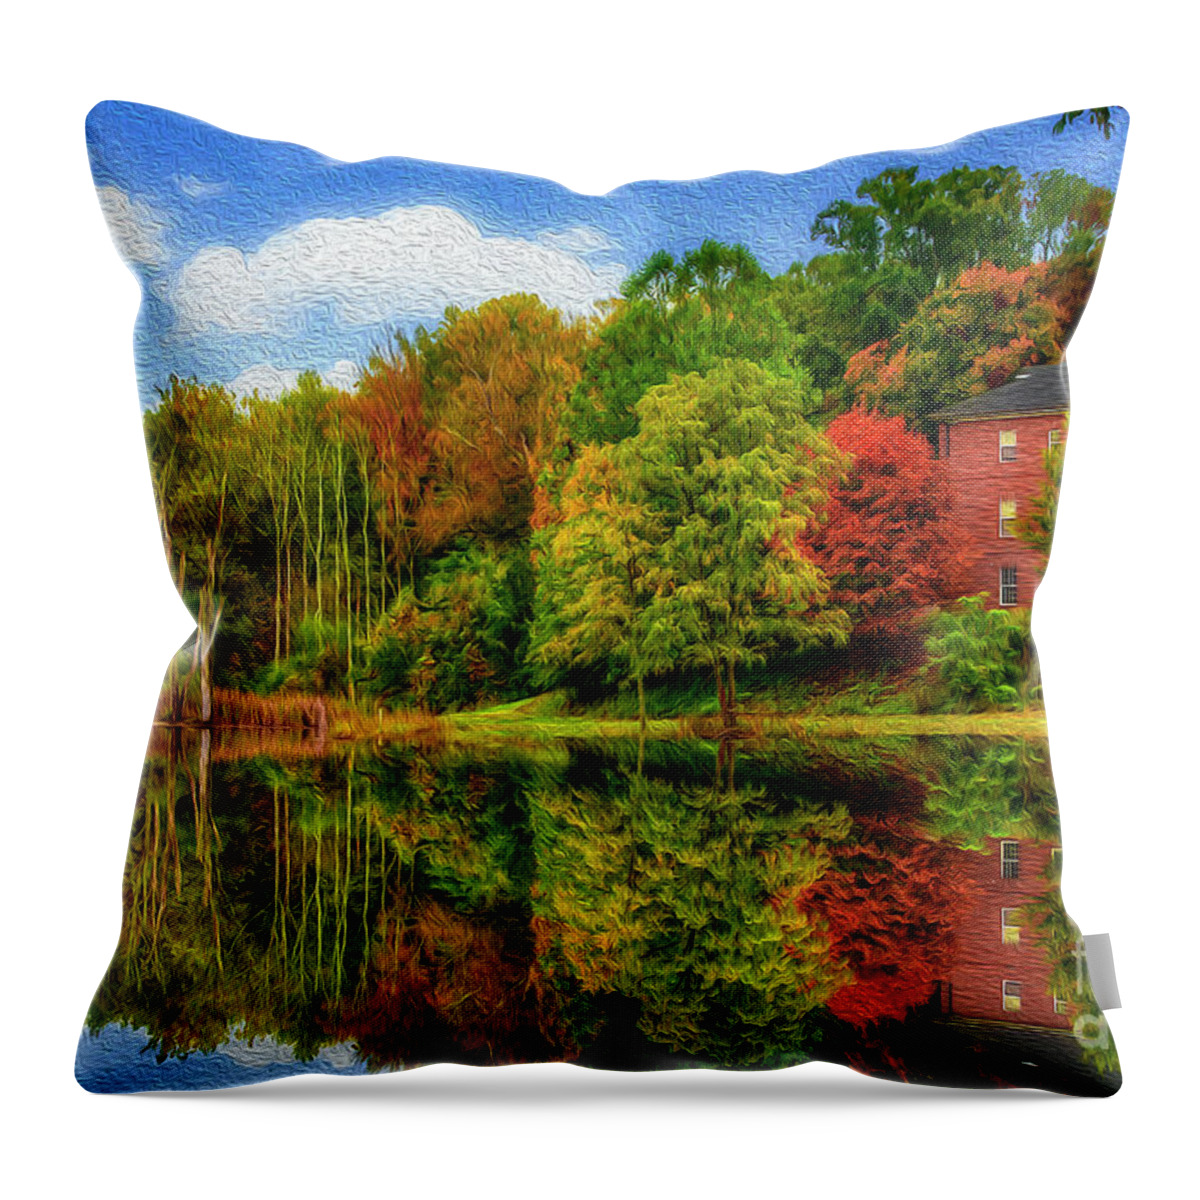 King College Throw Pillow featuring the photograph Autumn at King College oil painting by Shelia Hunt